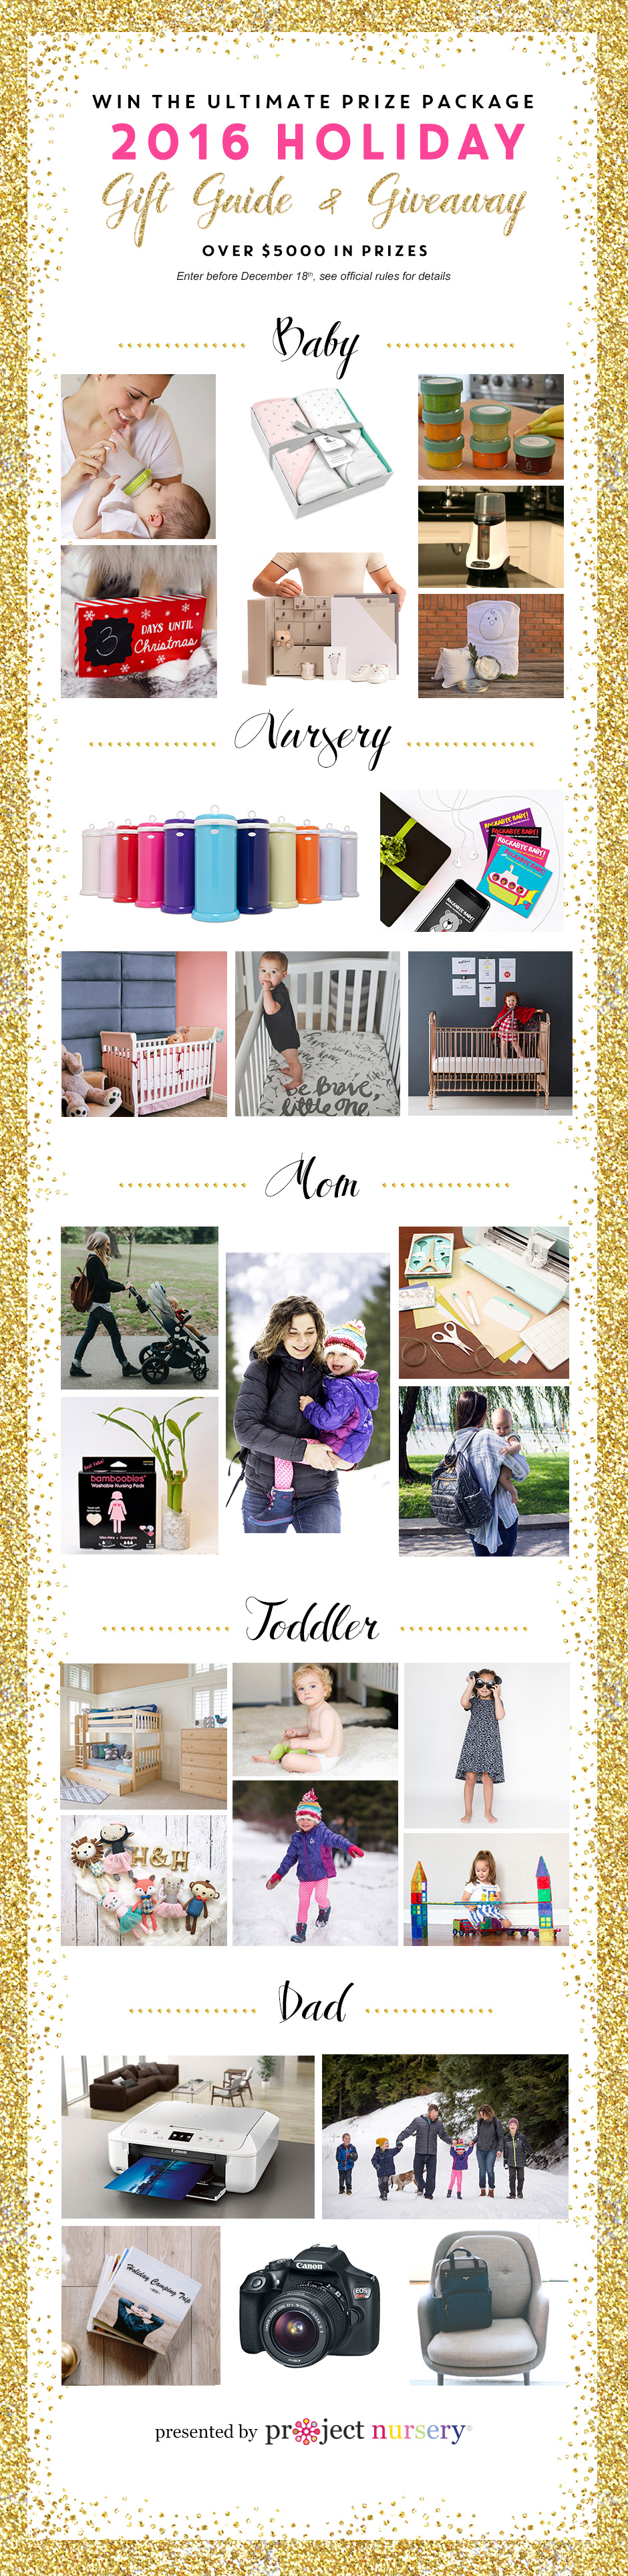 Project Nursery 2016 Holiday Gift Guide + Giveaway